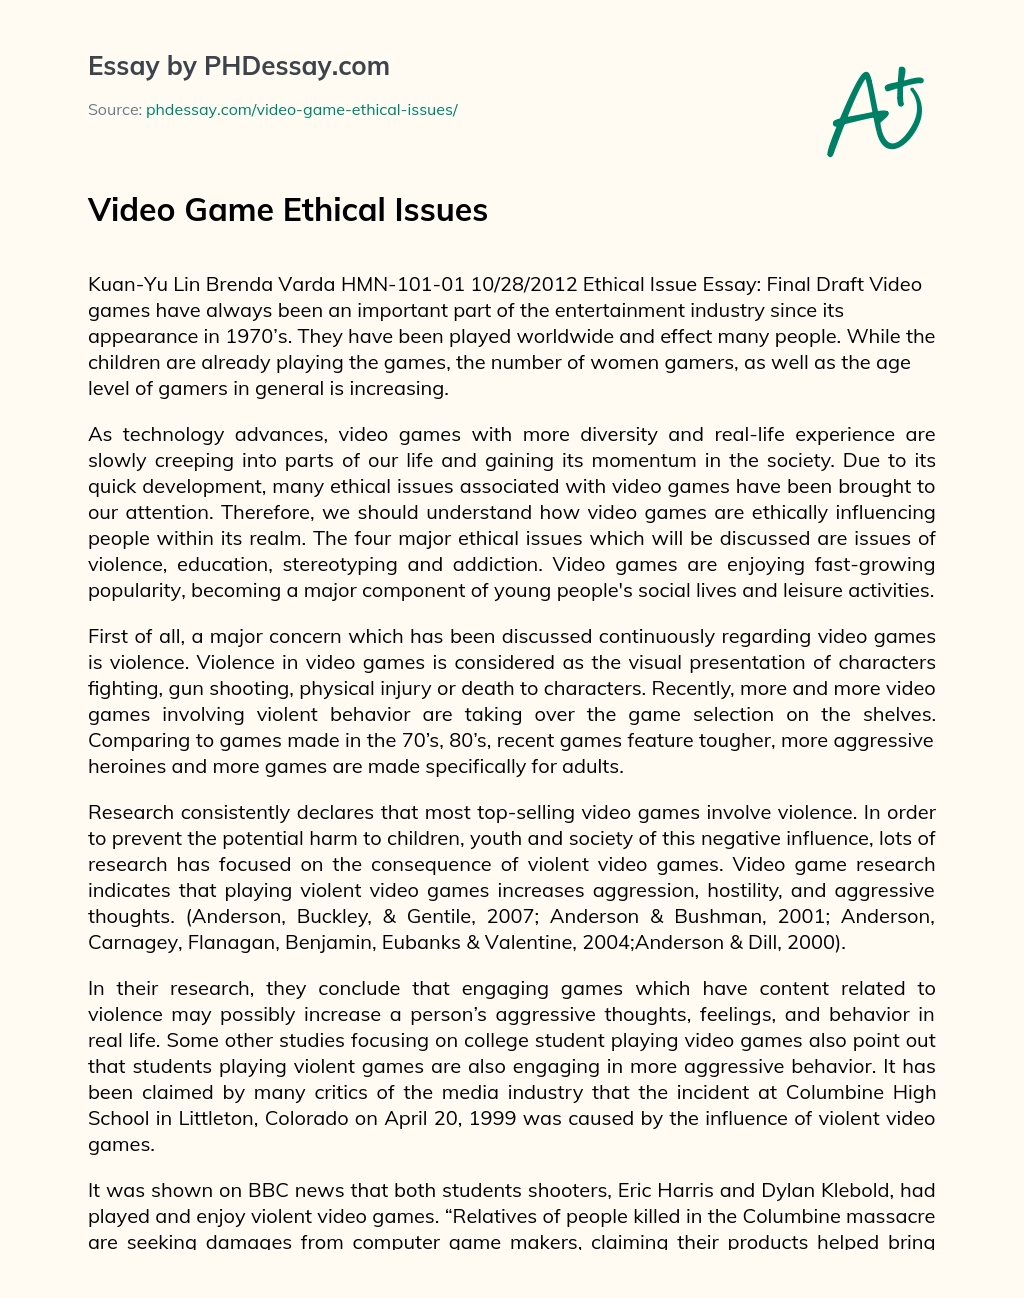 Video Game Ethical Issues essay